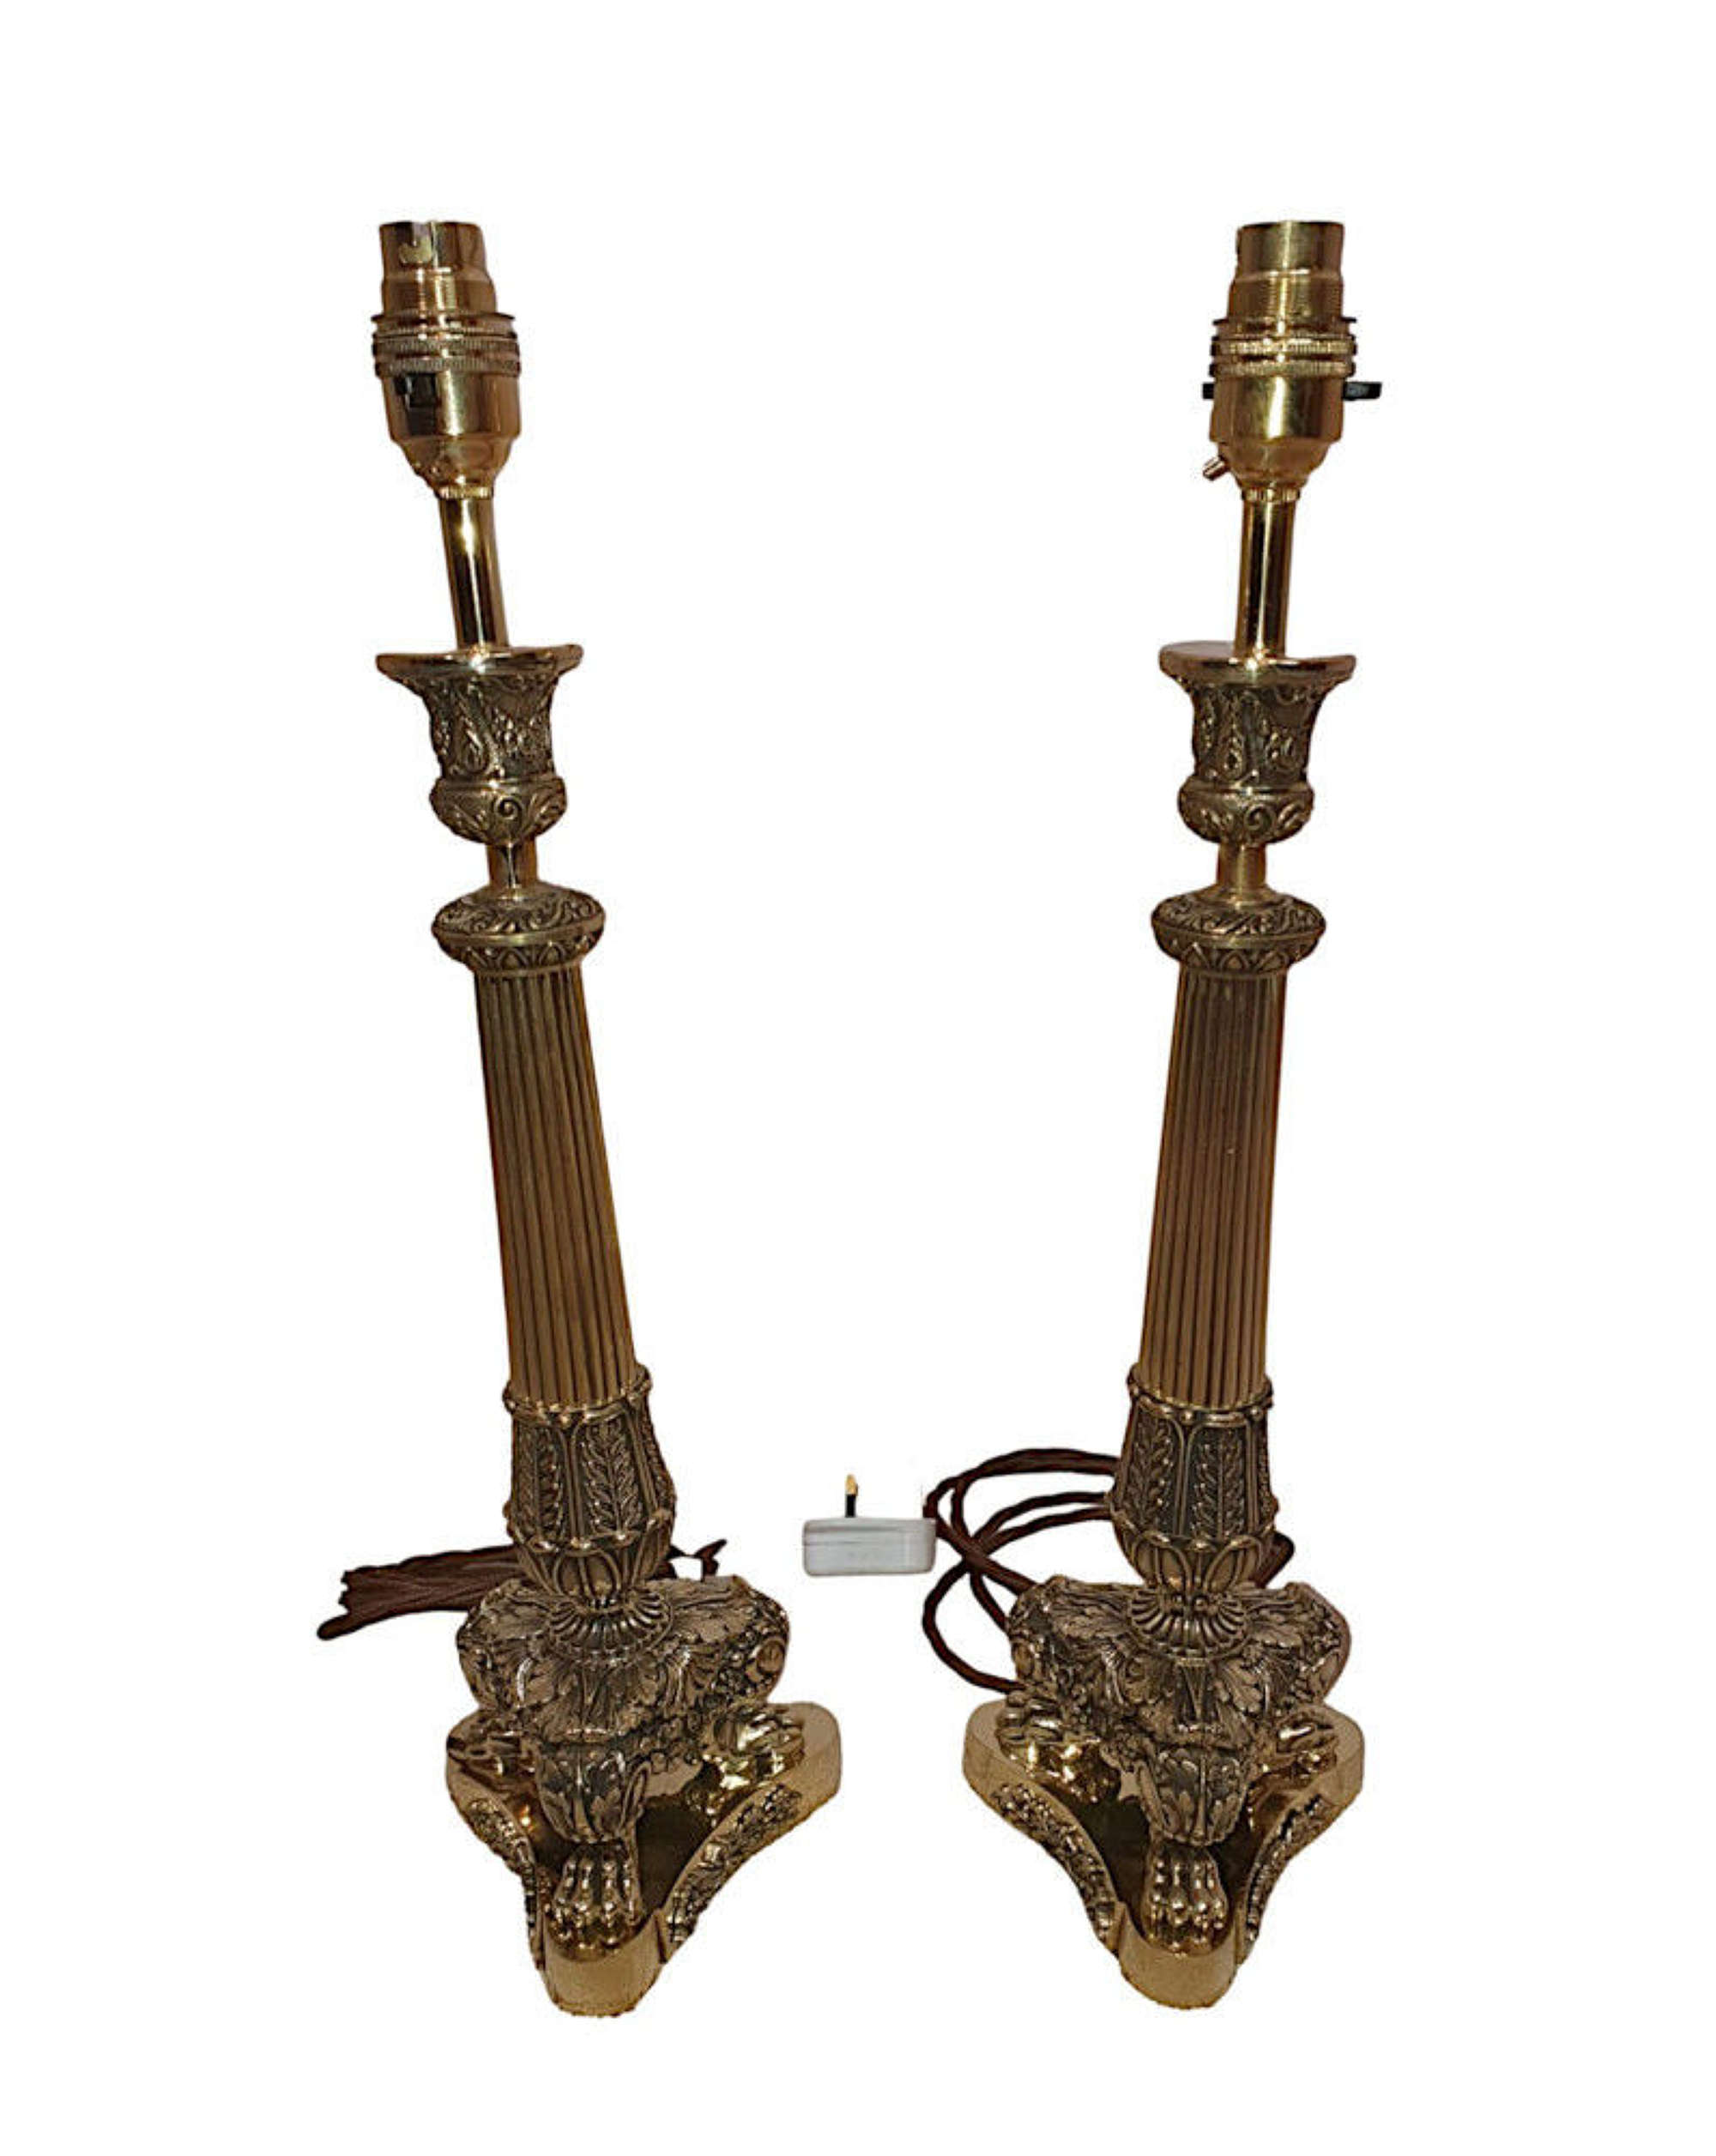 A Stunning Pair Of 19th Century Empire Brass Candlesticks Converted To